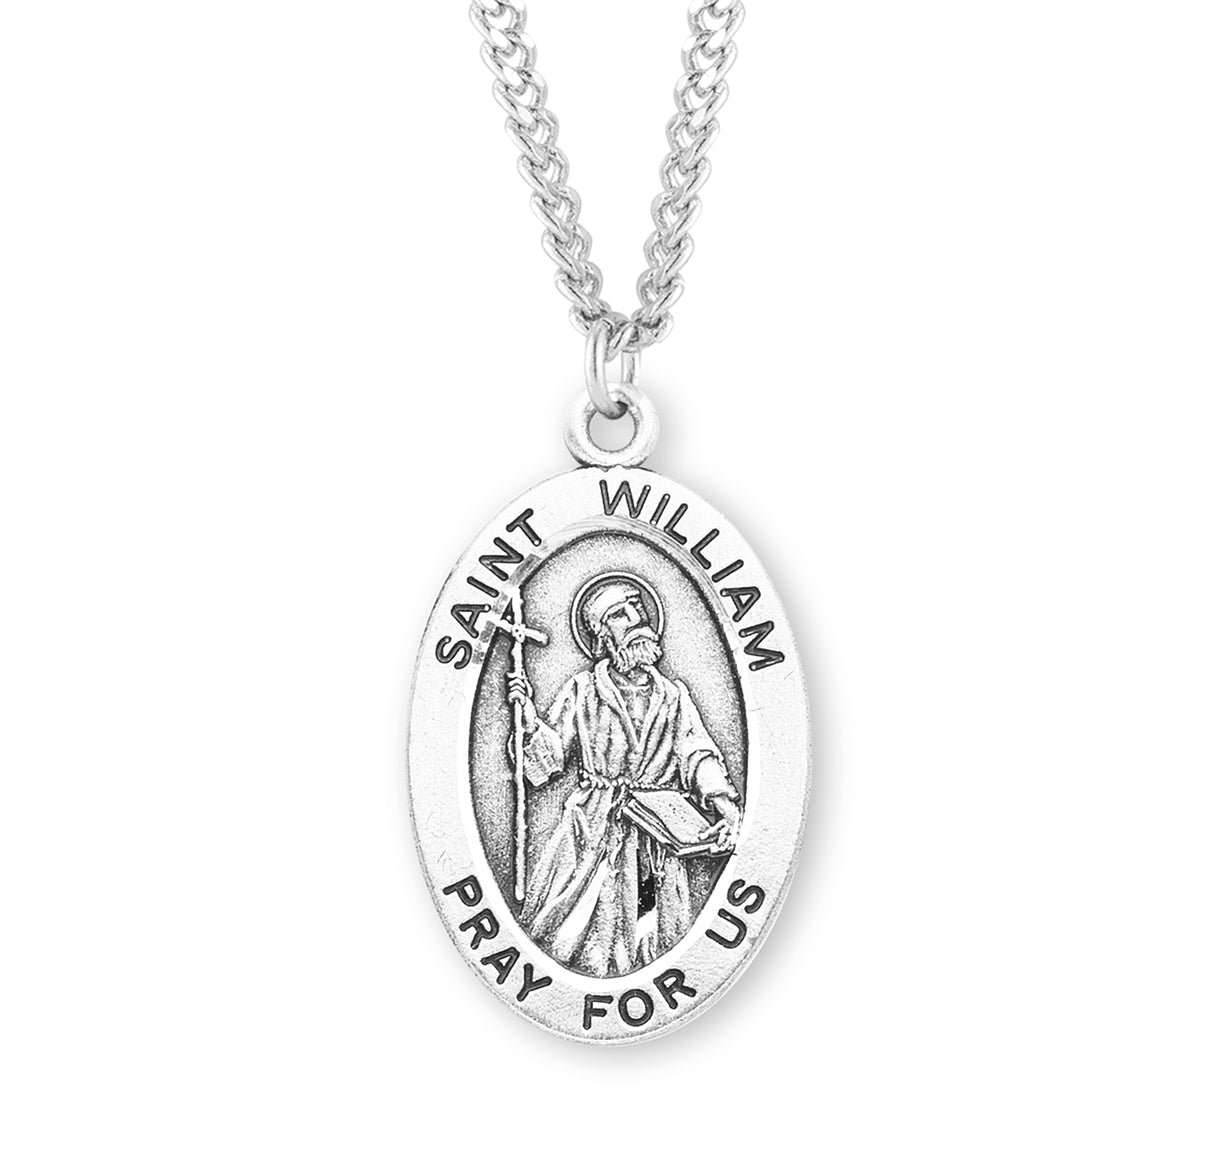 Patron Saint William Oval Sterling Silver Medal